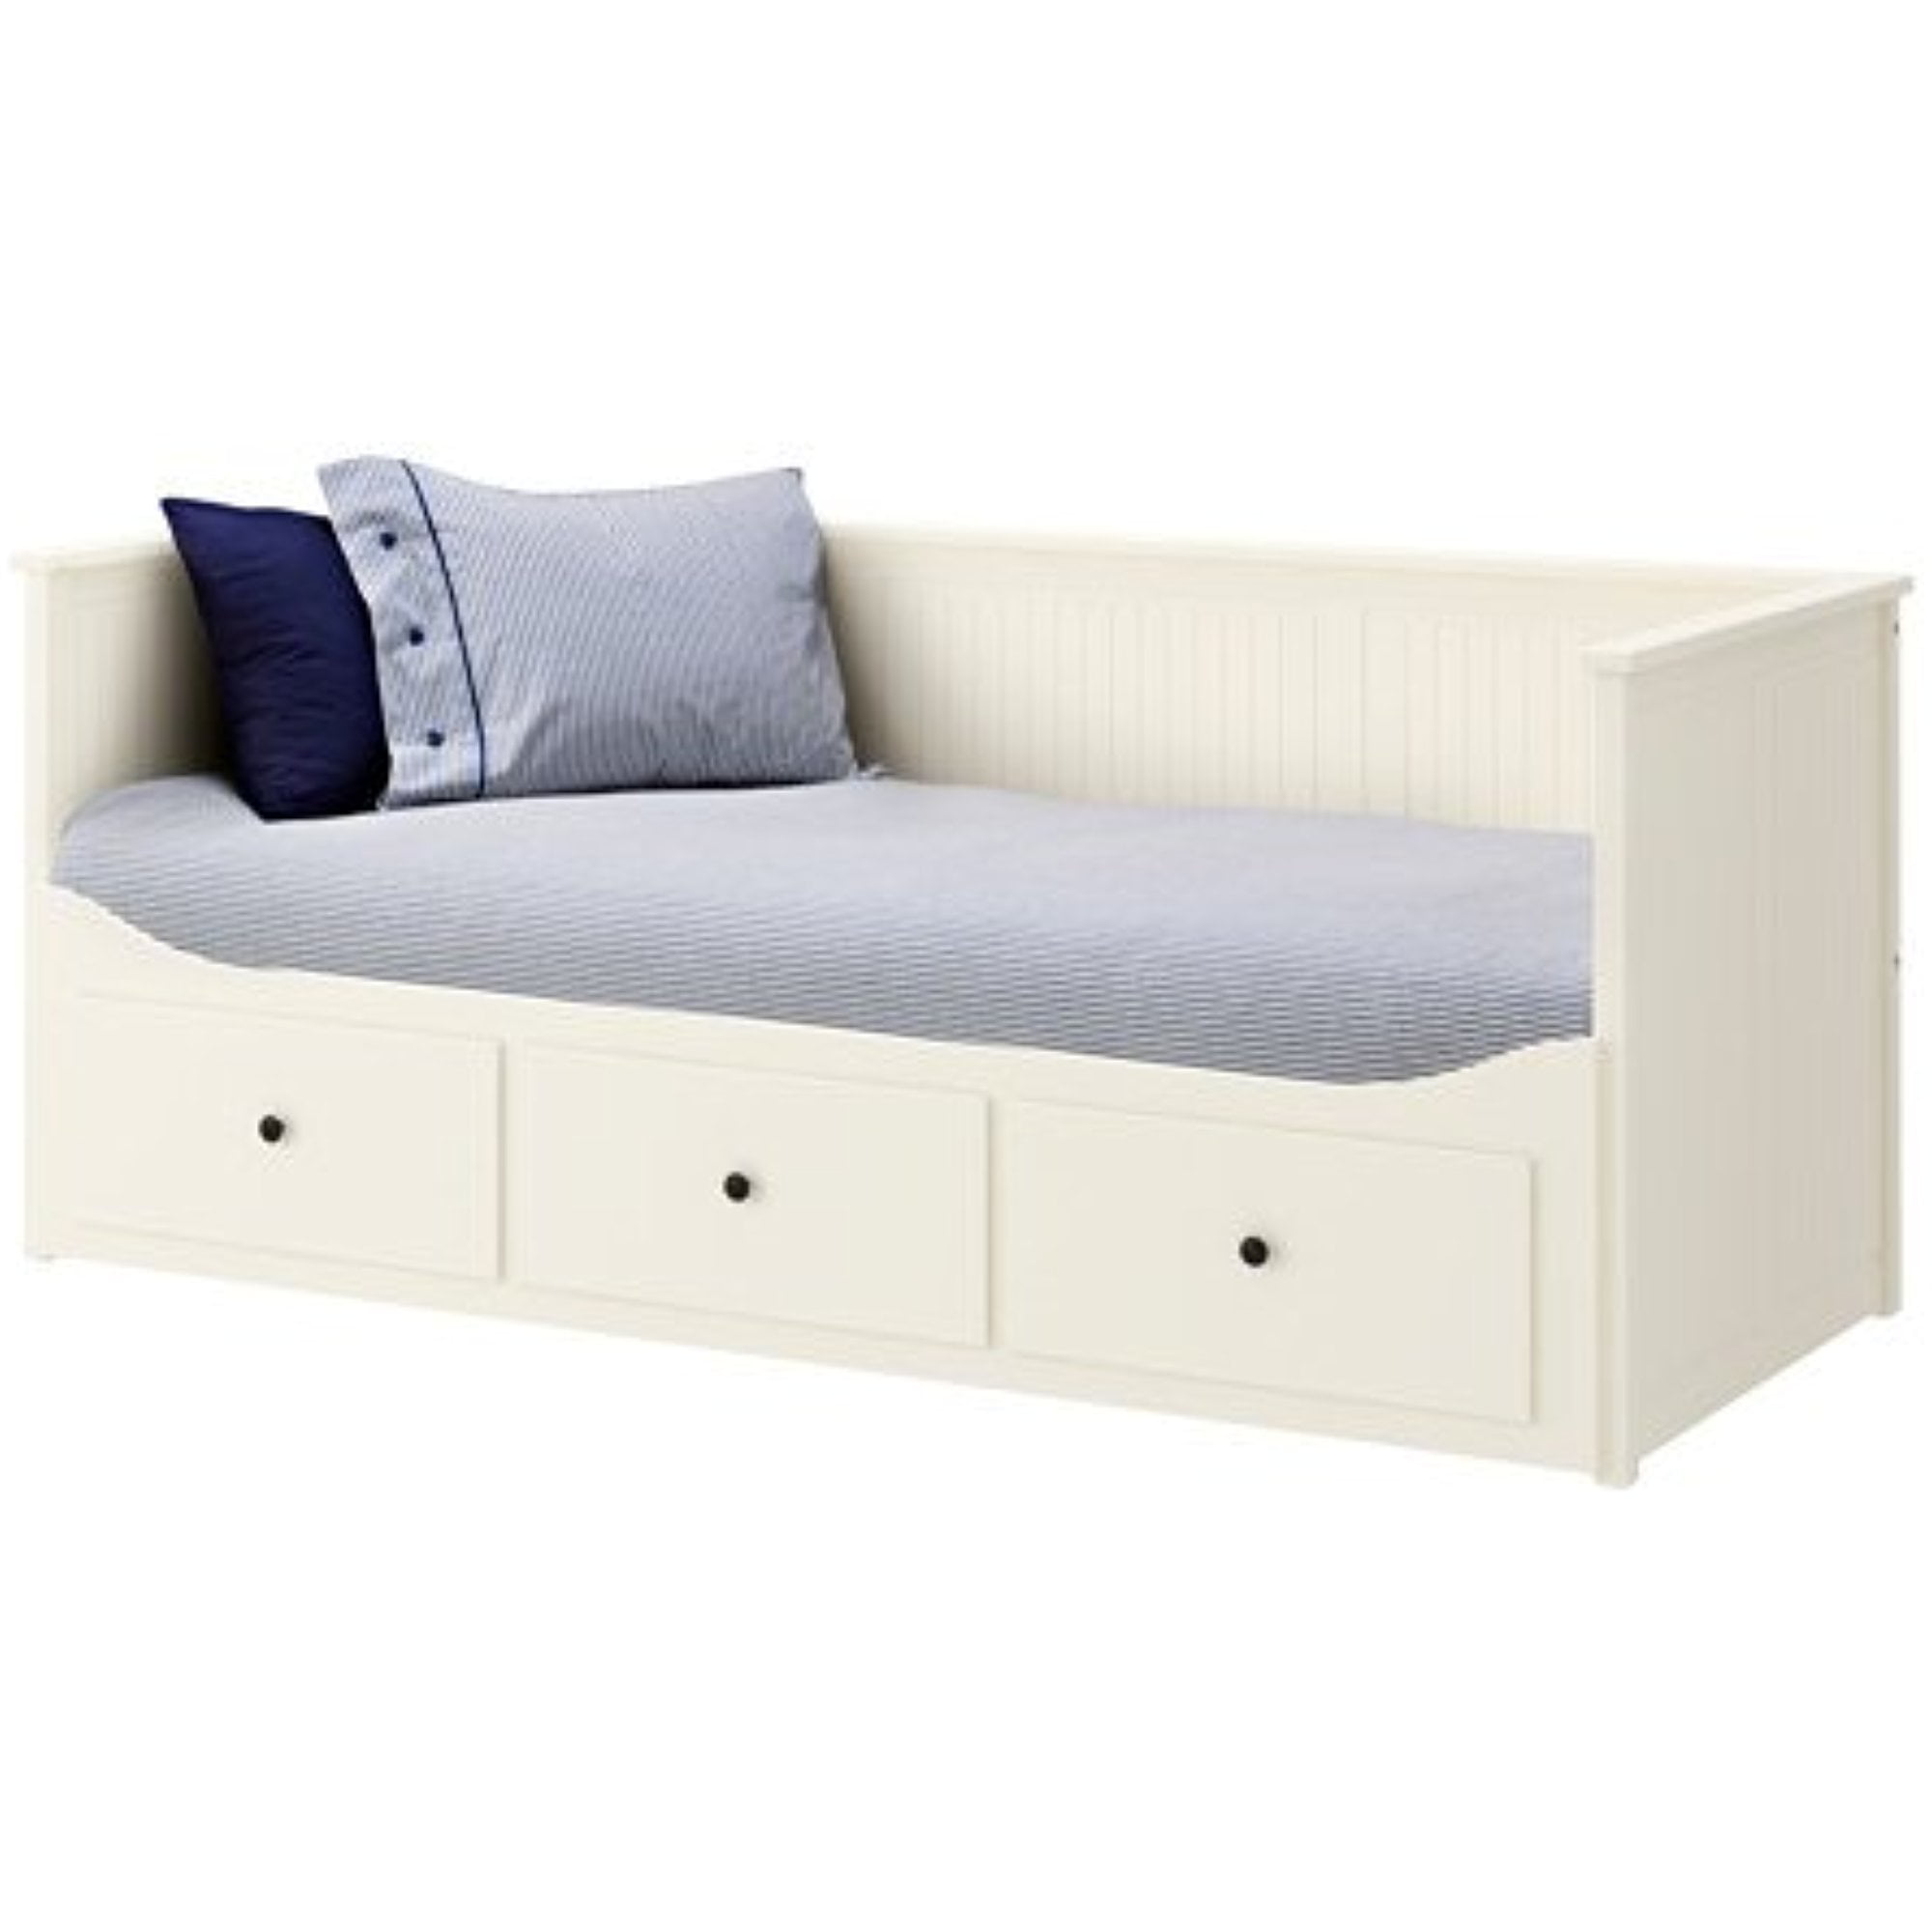 Ikea Twin Size Daybed With 3 Drawers 2 Mattresses White Meistervik Firm 22386 1122 164 Walmart Com Walmart Com,Goodwill Furniture Donation Seattle